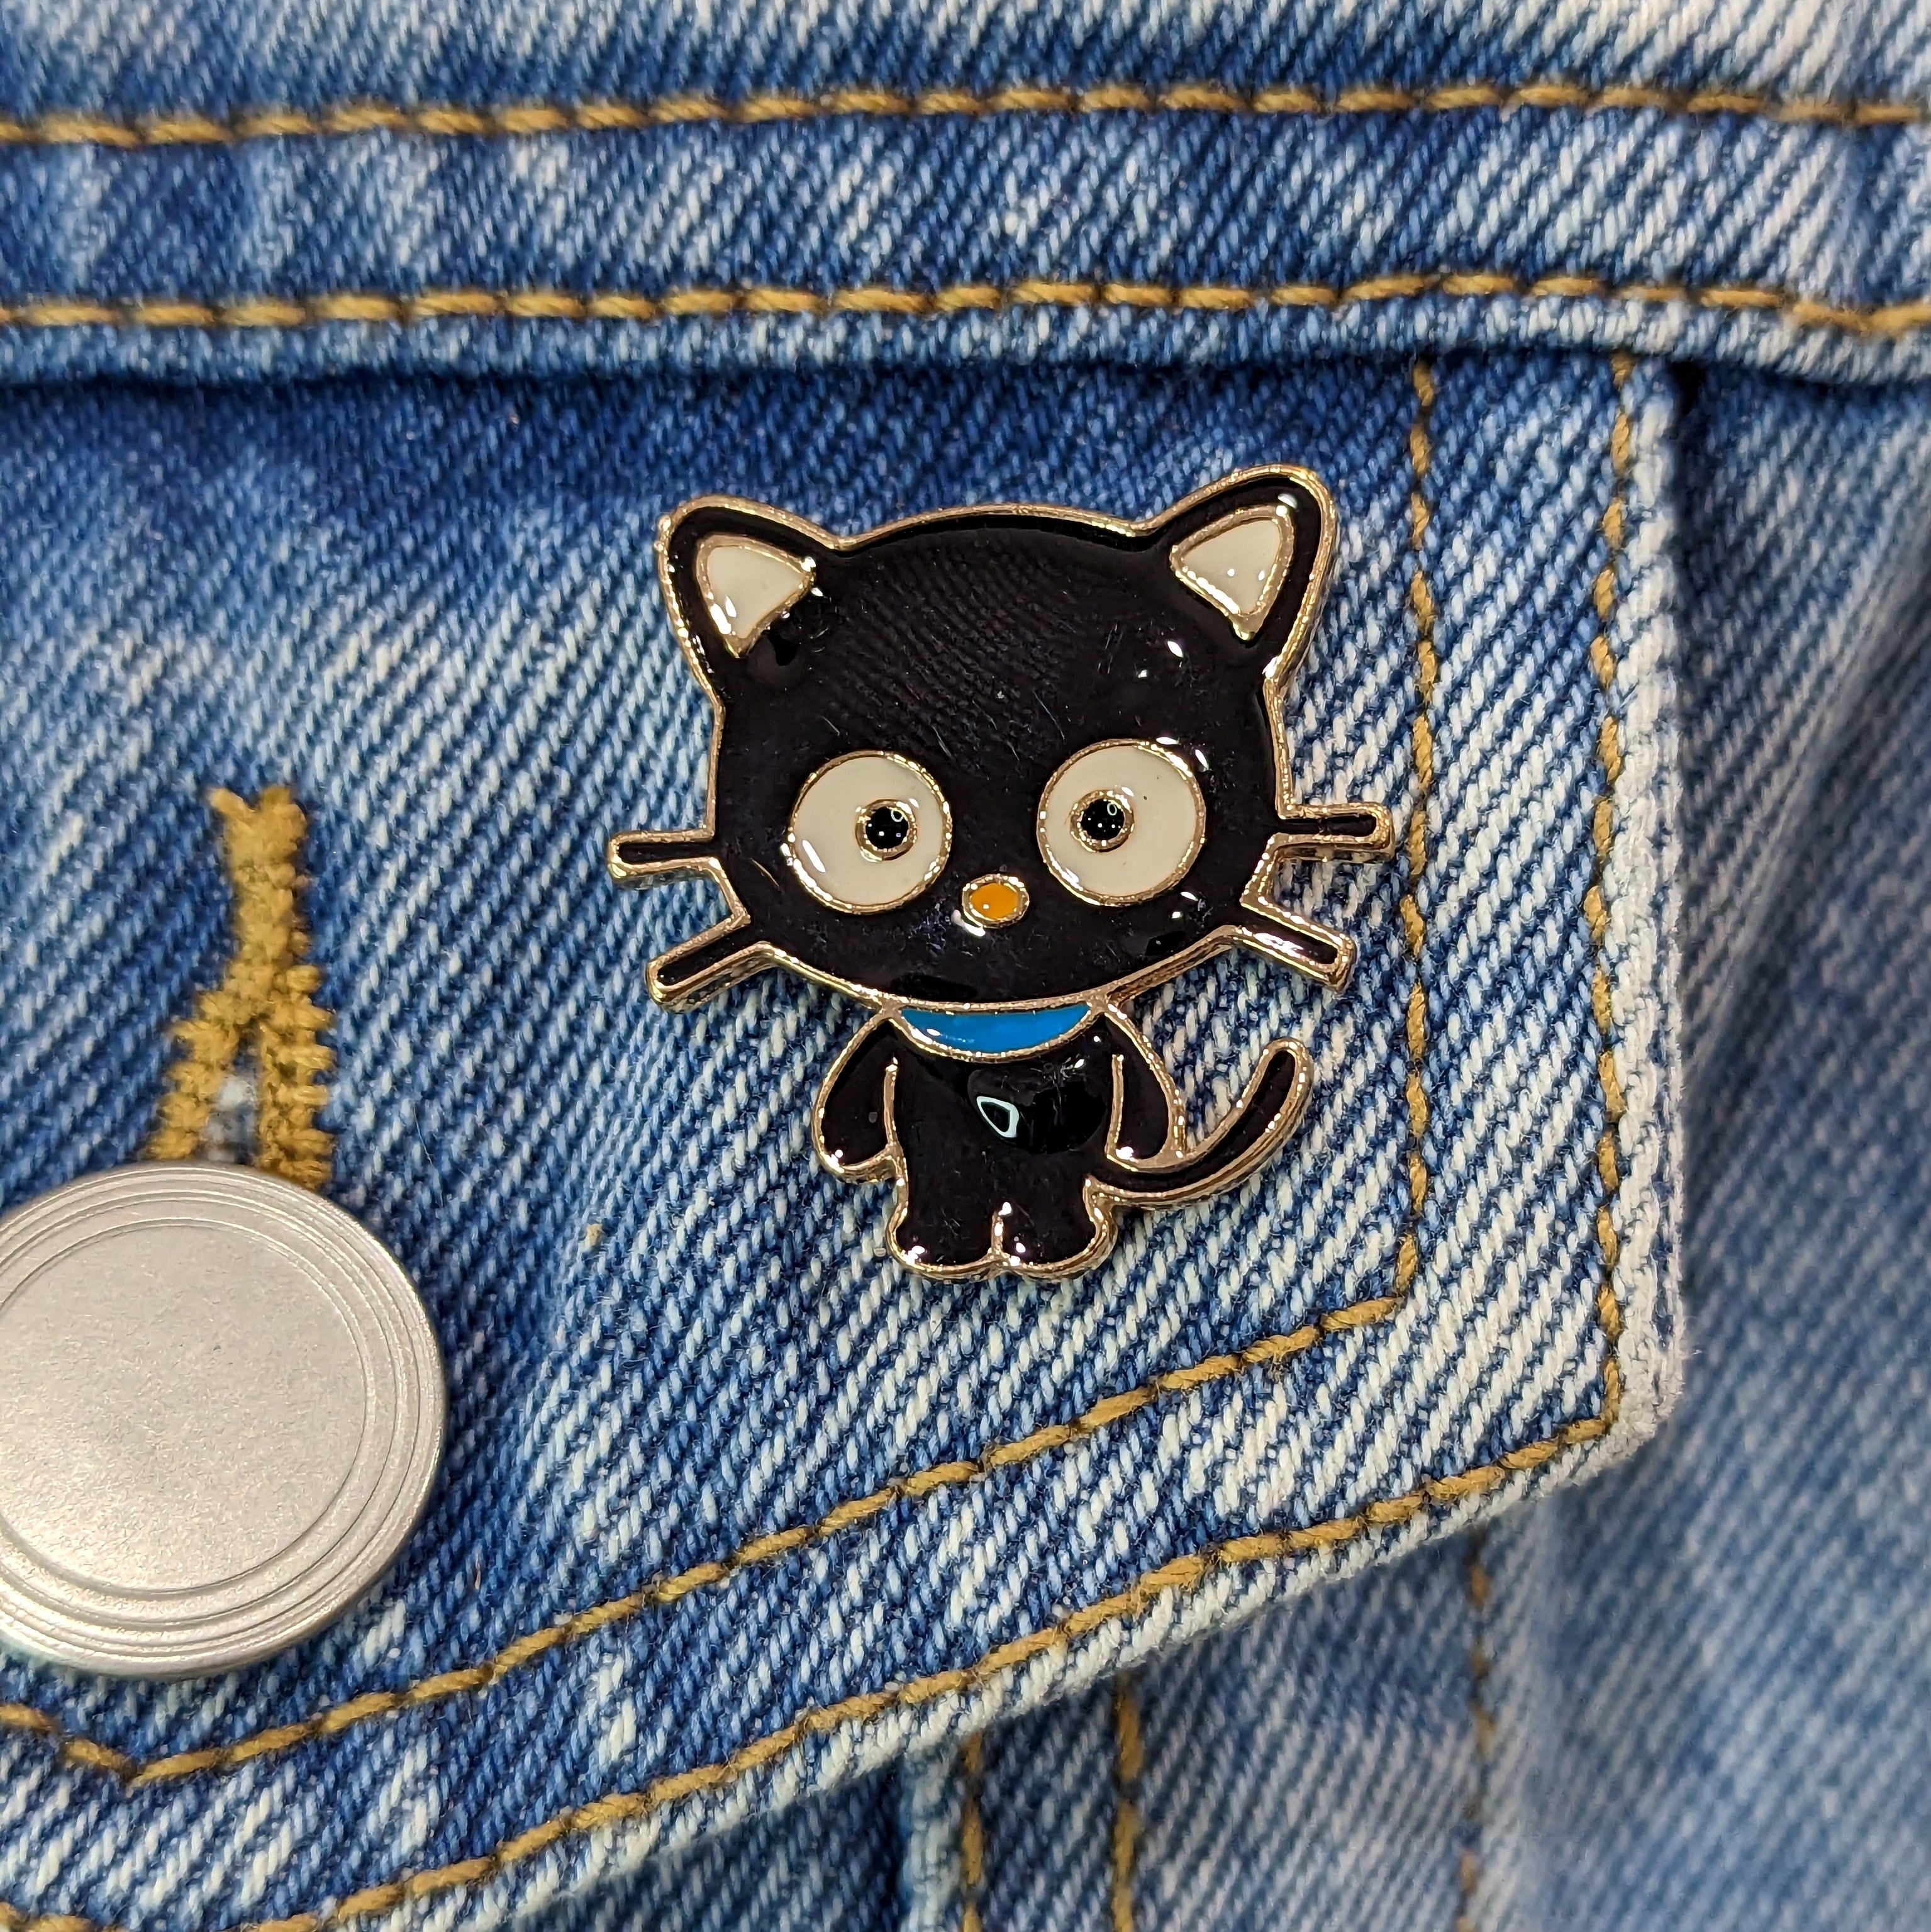 Enamel Pin - Black Cat with a Blue Collar